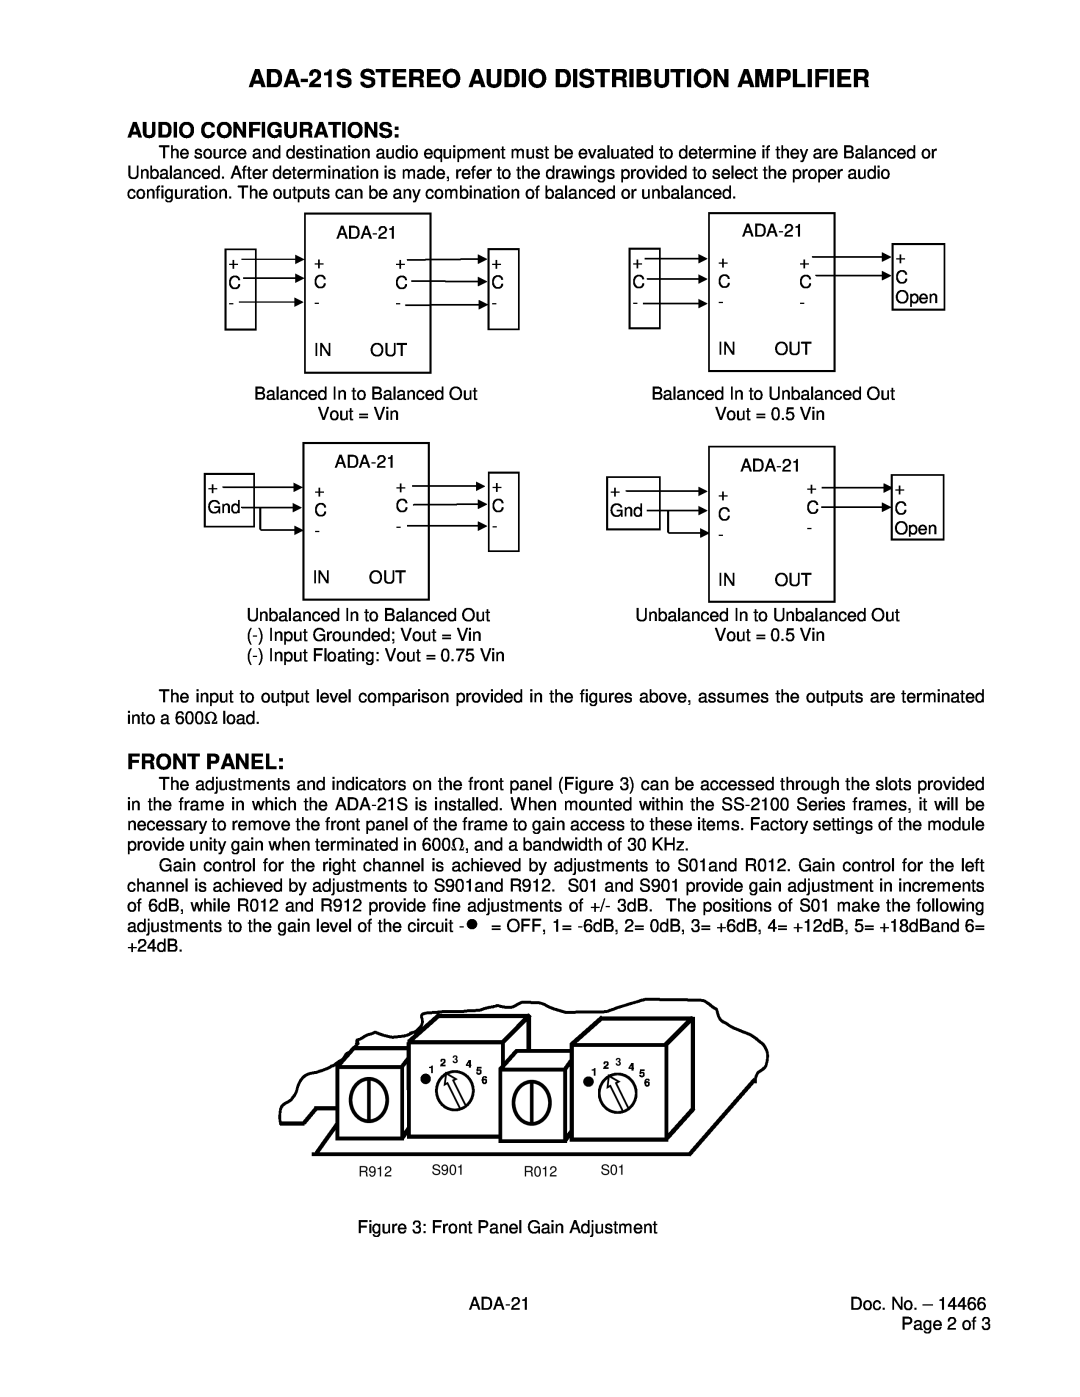 Sigma instruction manual Audio Configurations, Front Panel, ADA-21S STEREO AUDIO DISTRIBUTION AMPLIFIER 